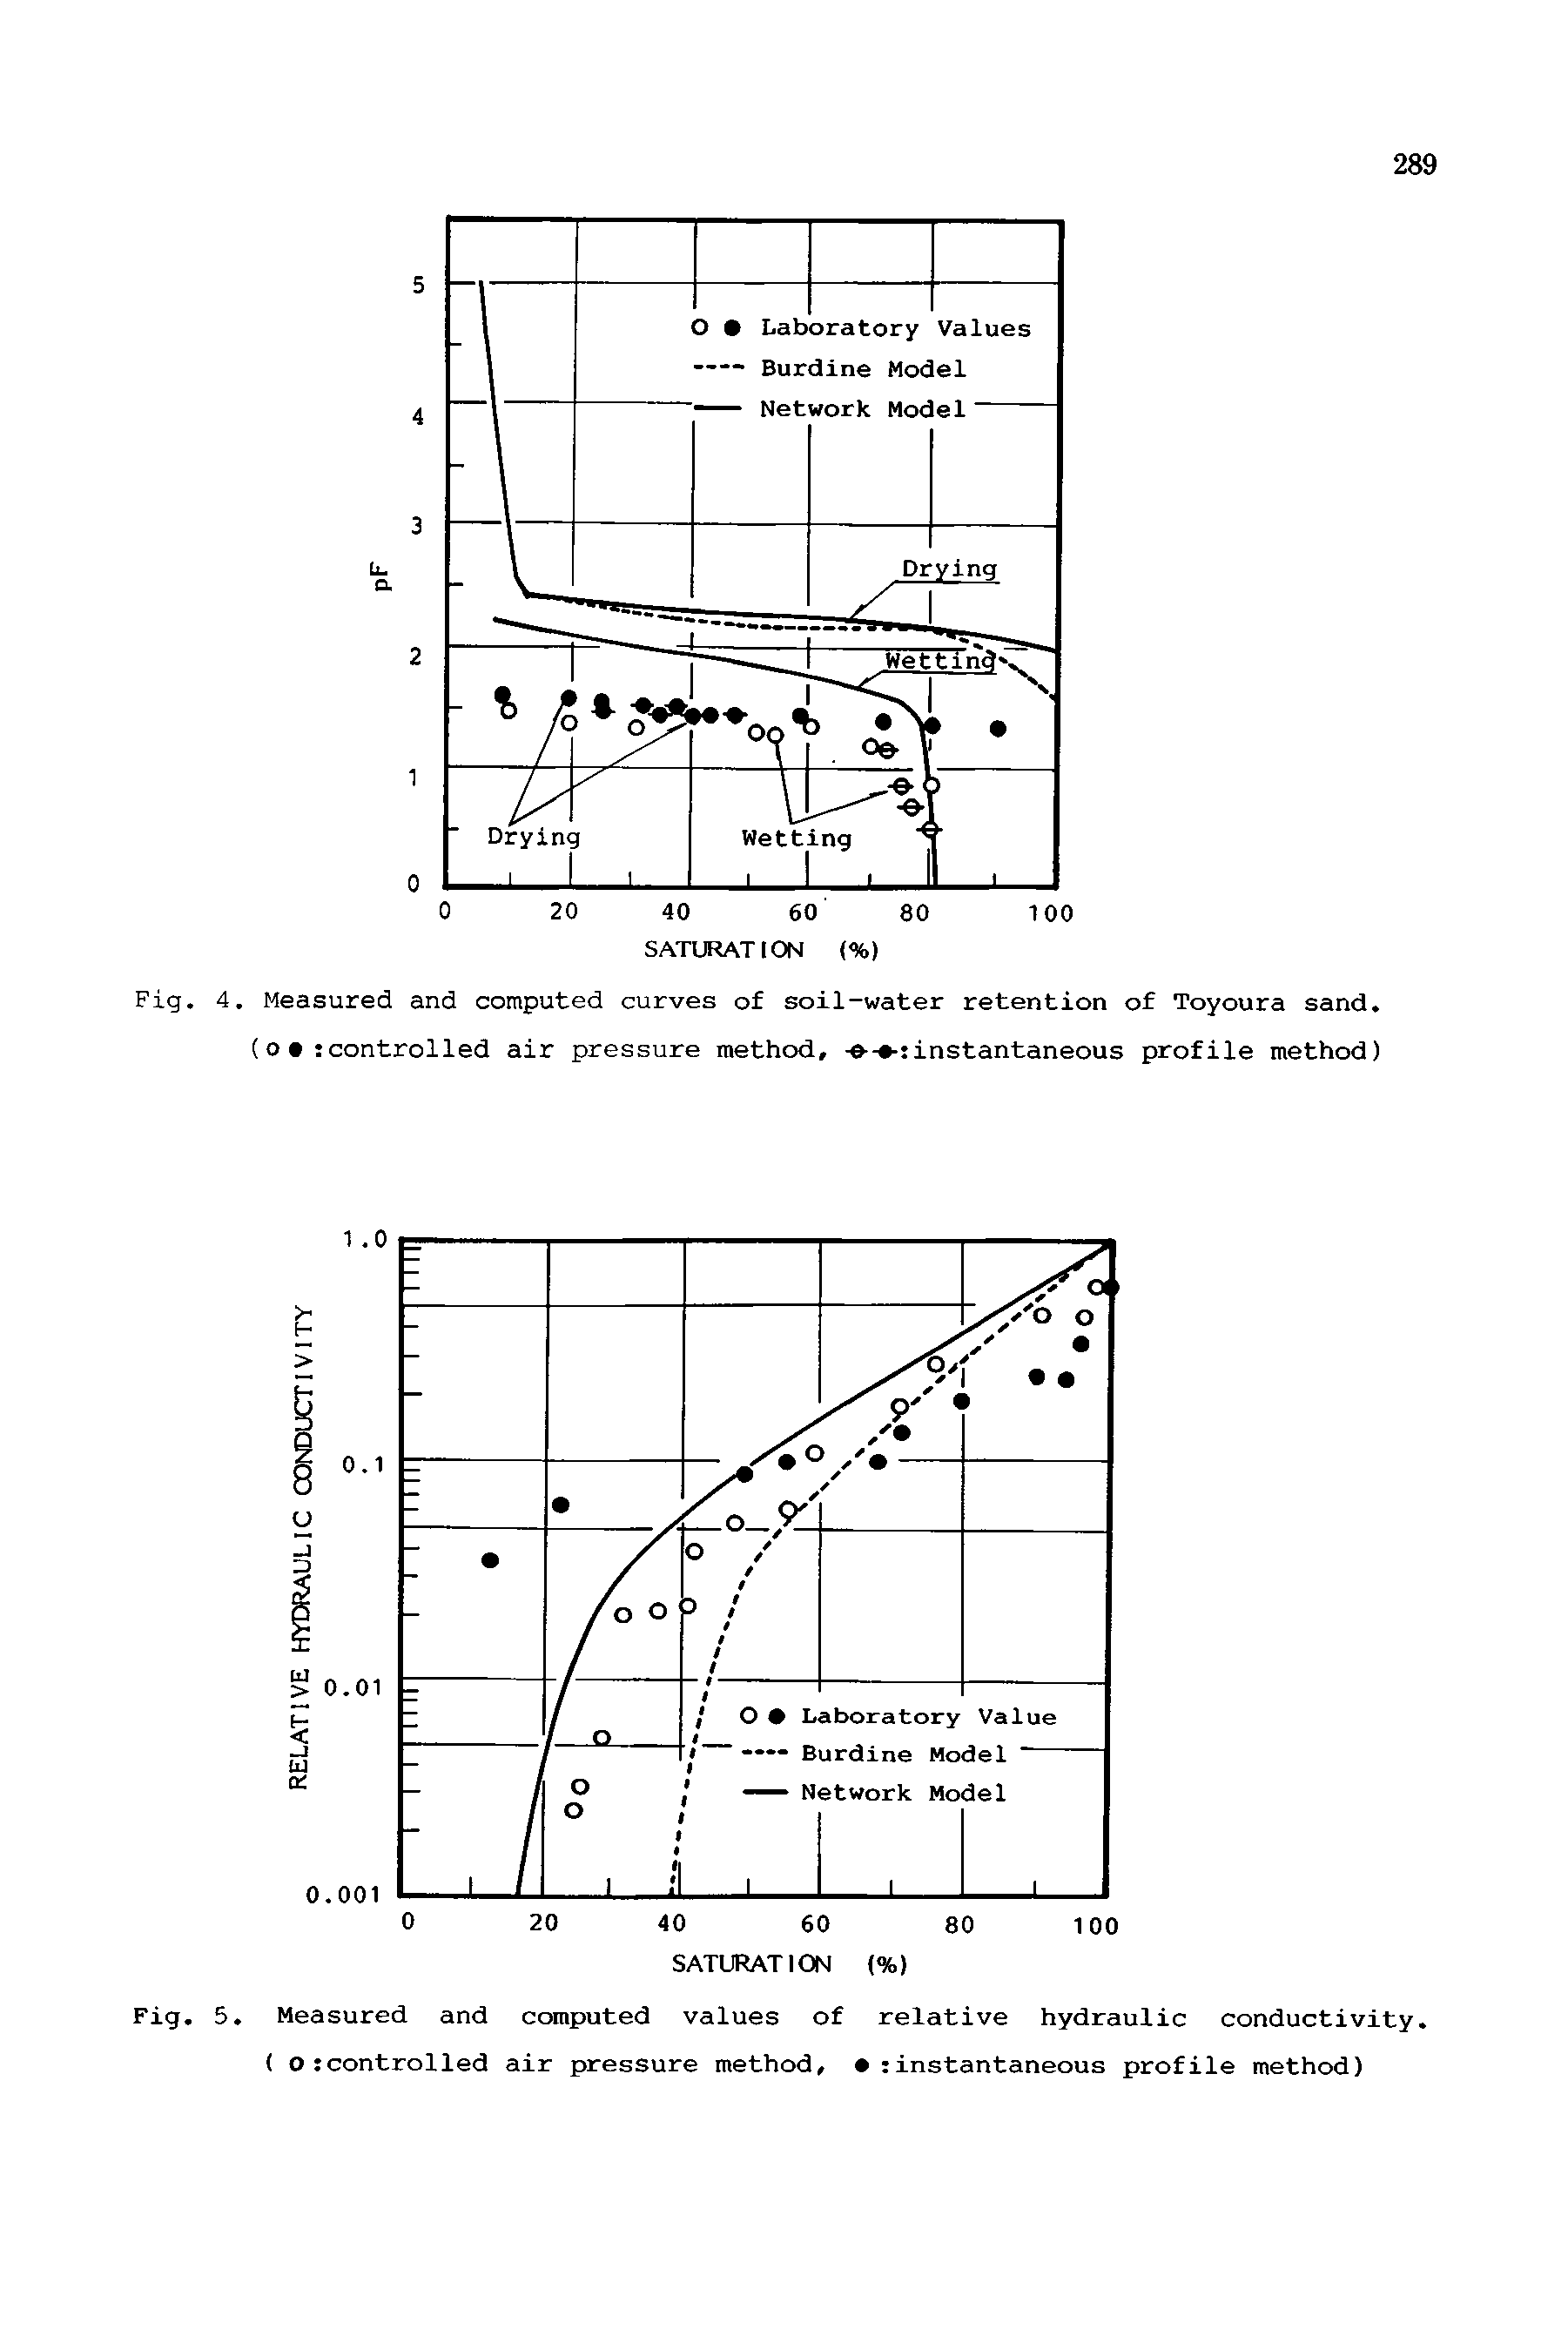 Fig. 4, Measured and computed curves of soil-water retention of Toyoura sand (0 controlled air pressure method, instantaneous profile method)...